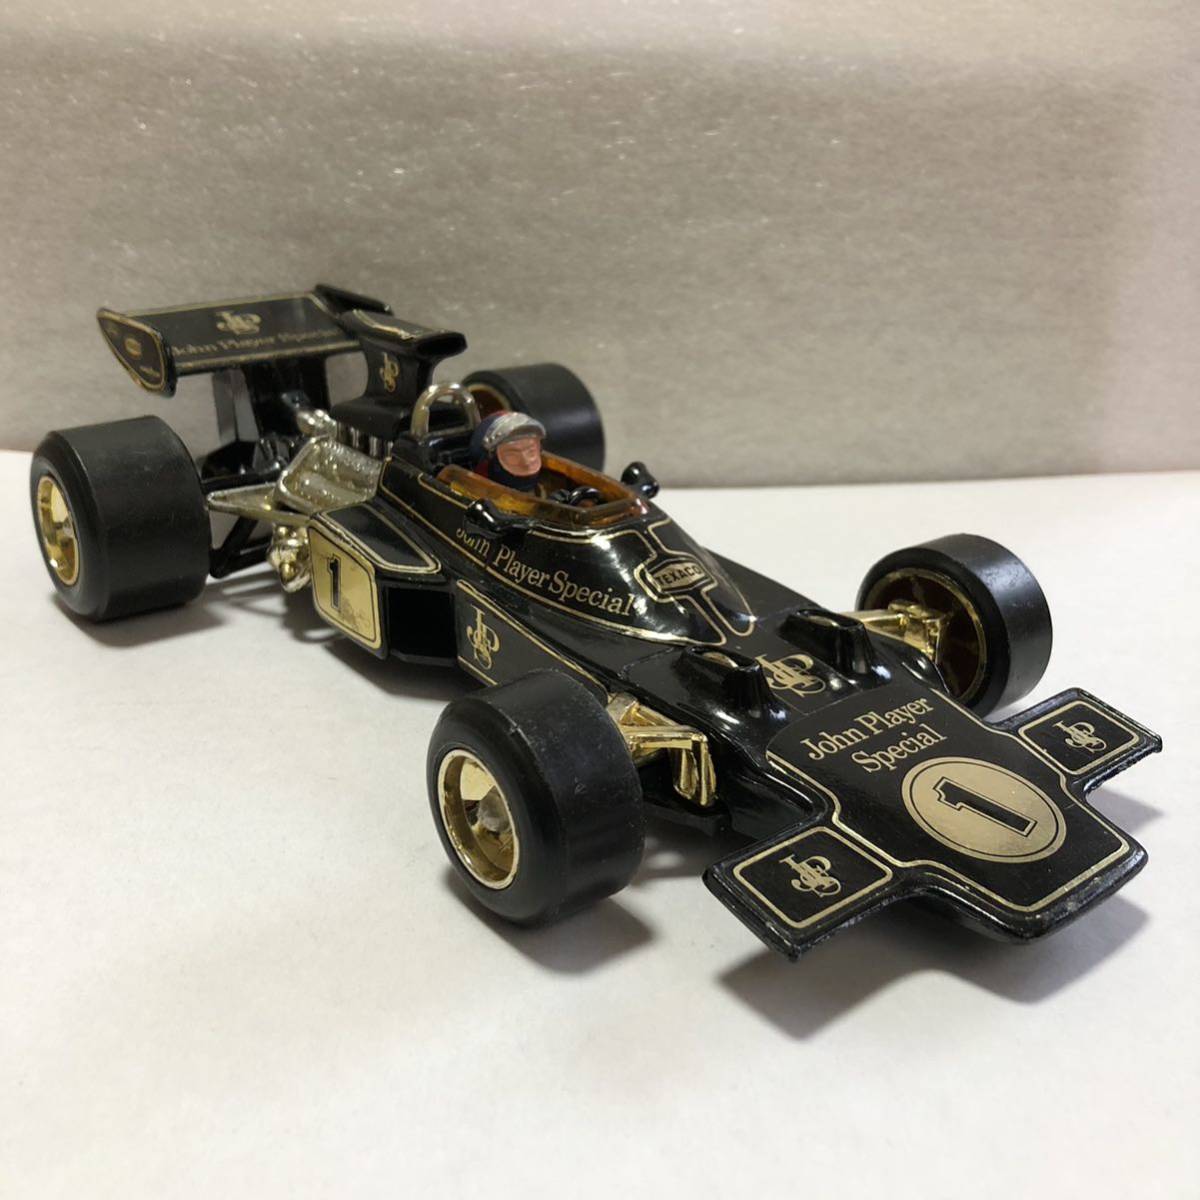  super ultra rare out of print rare!CORGI| Corgi!JOHN PLAYER SPECIAL F1.1/18 scale! die-cast minicar! that time thing! hard-to-find model!